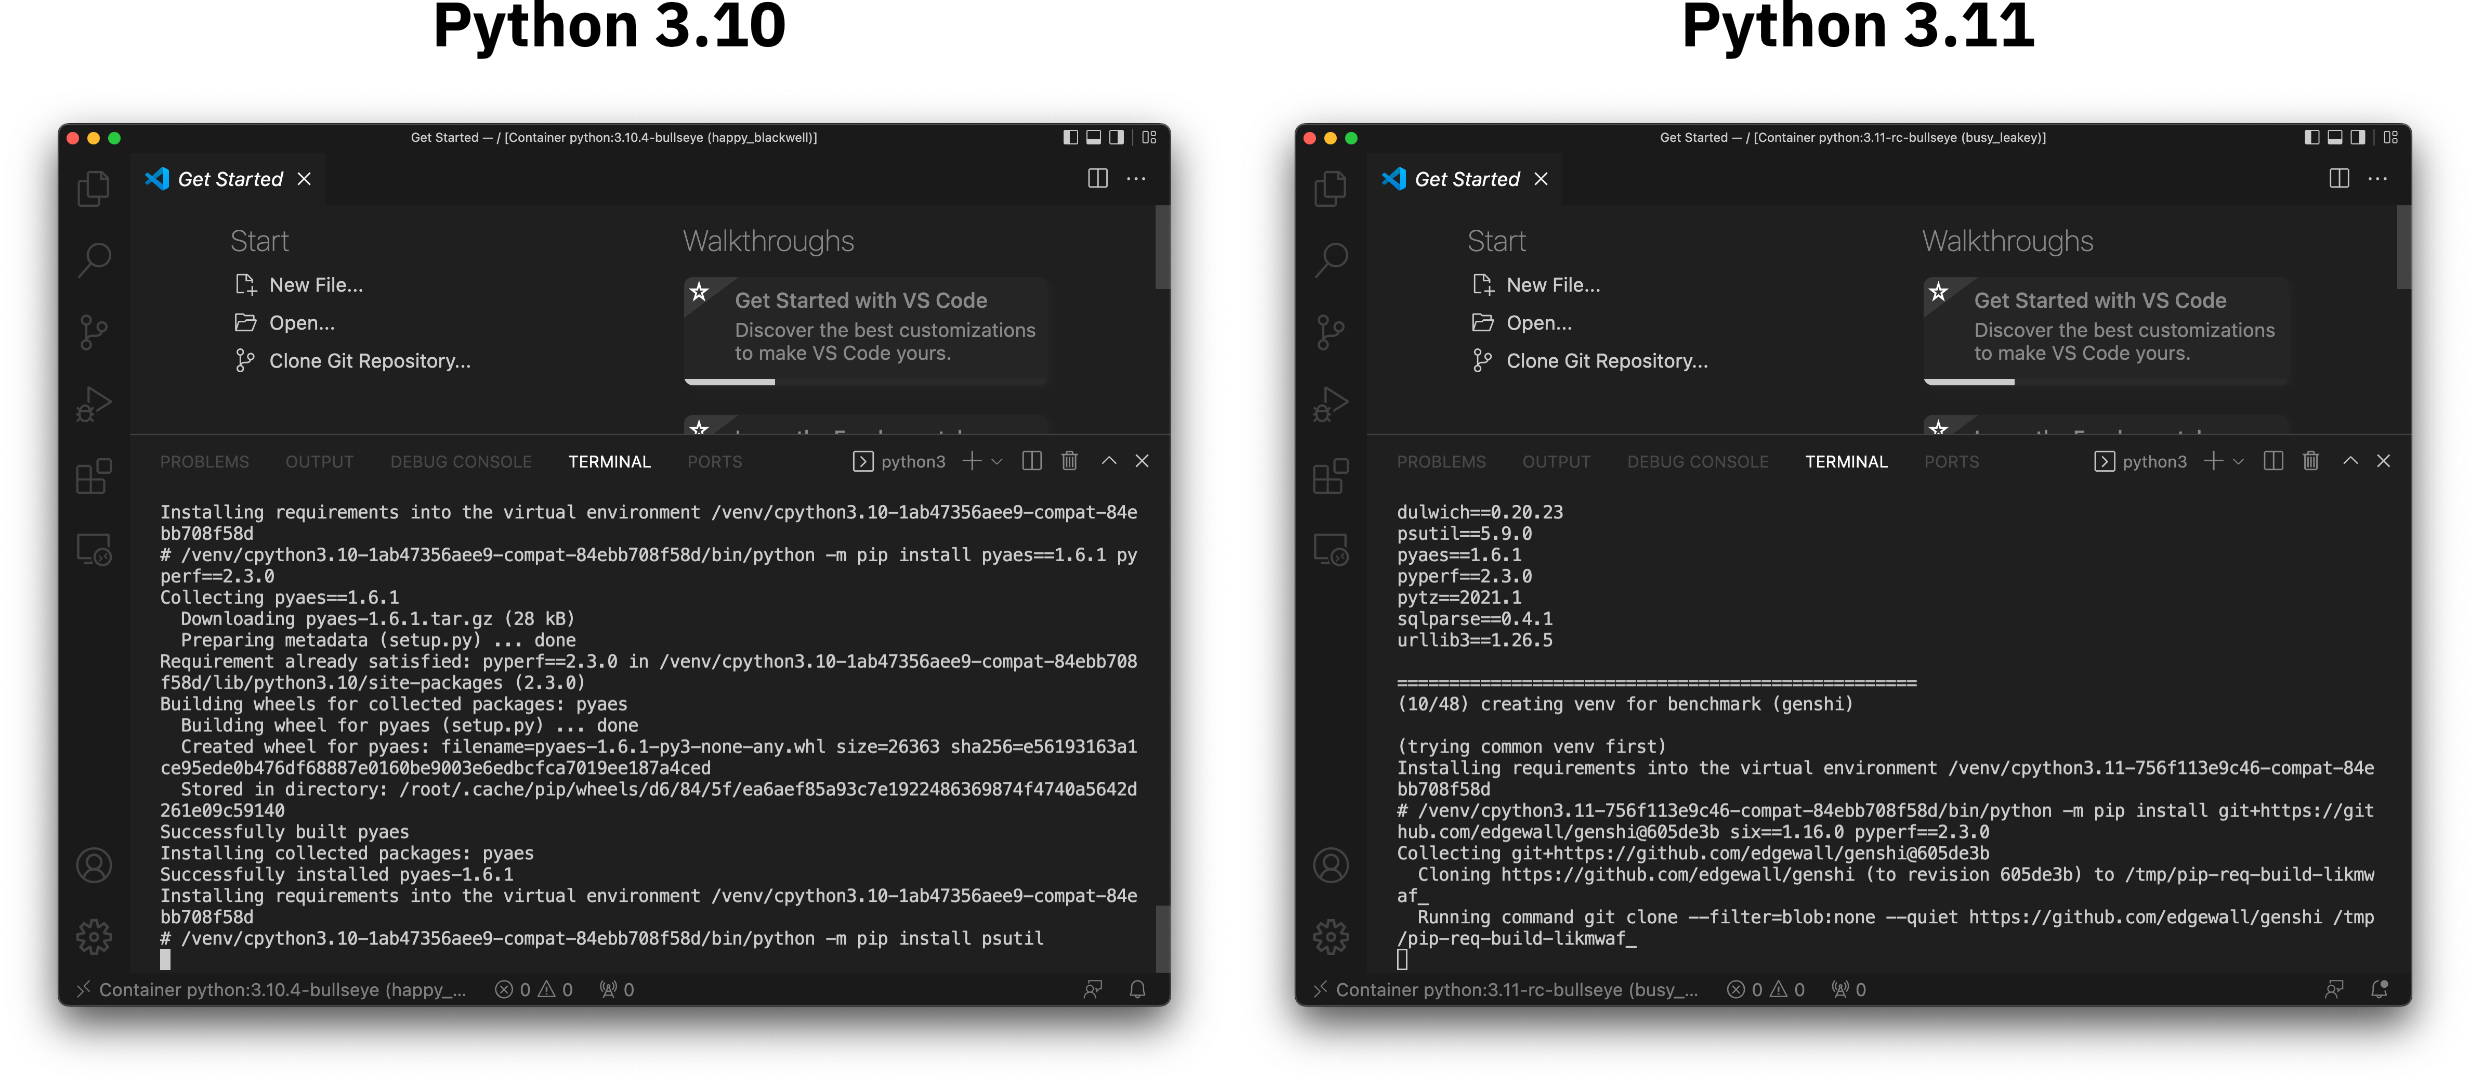 Image 2 - Running Python benchmarks on 3.10 and 3.11 in Docker (image by author)